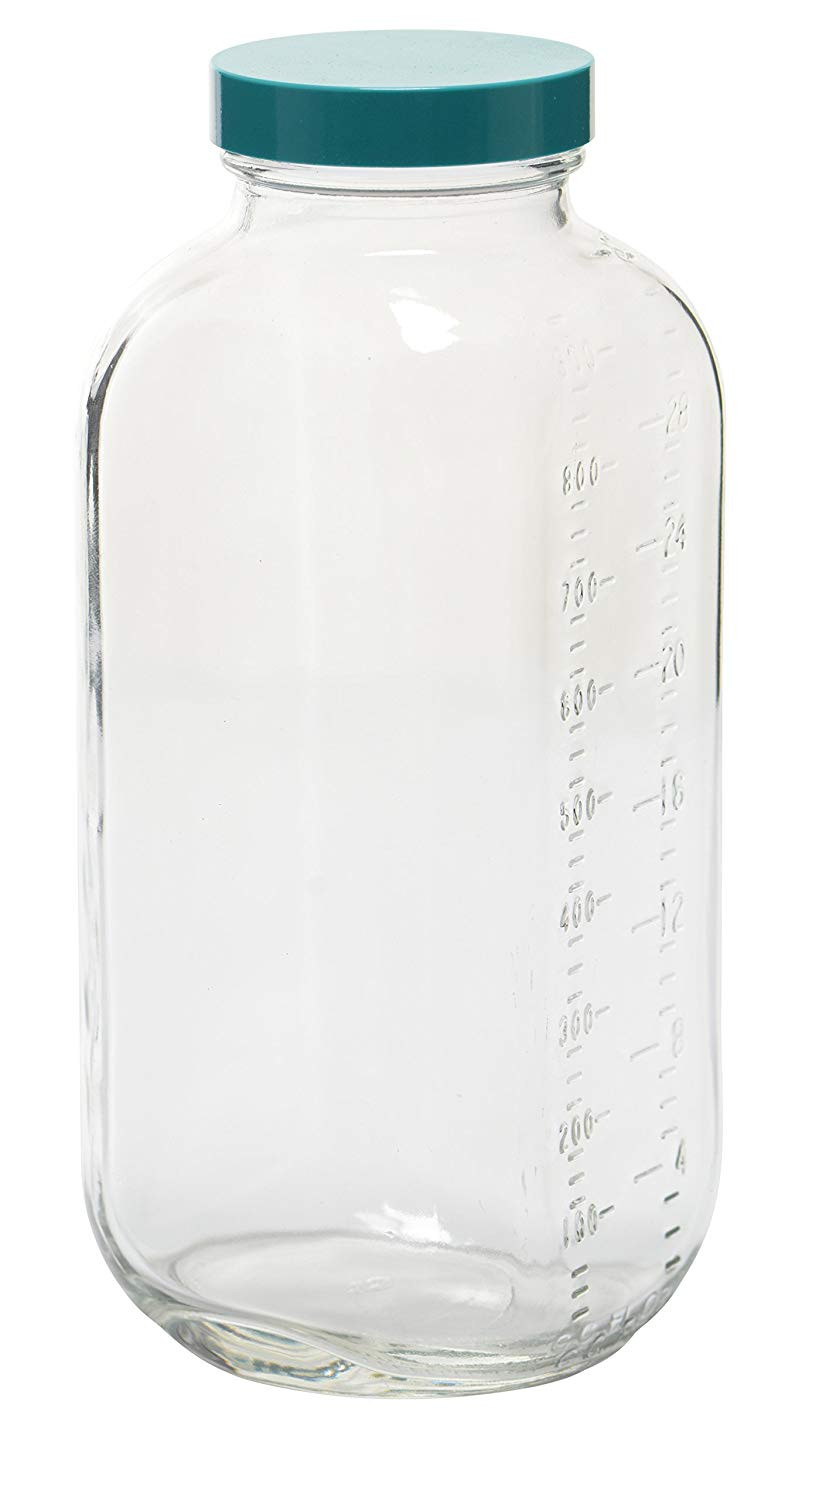 27 Lovable Clear Glass Bottle Vase 2024 free download clear glass bottle vase of amazon com vestil btl sg g 32 glass square graduated bottle with with regard to amazon com vestil btl sg g 32 glass square graduated bottle with green cap 32 oz ca